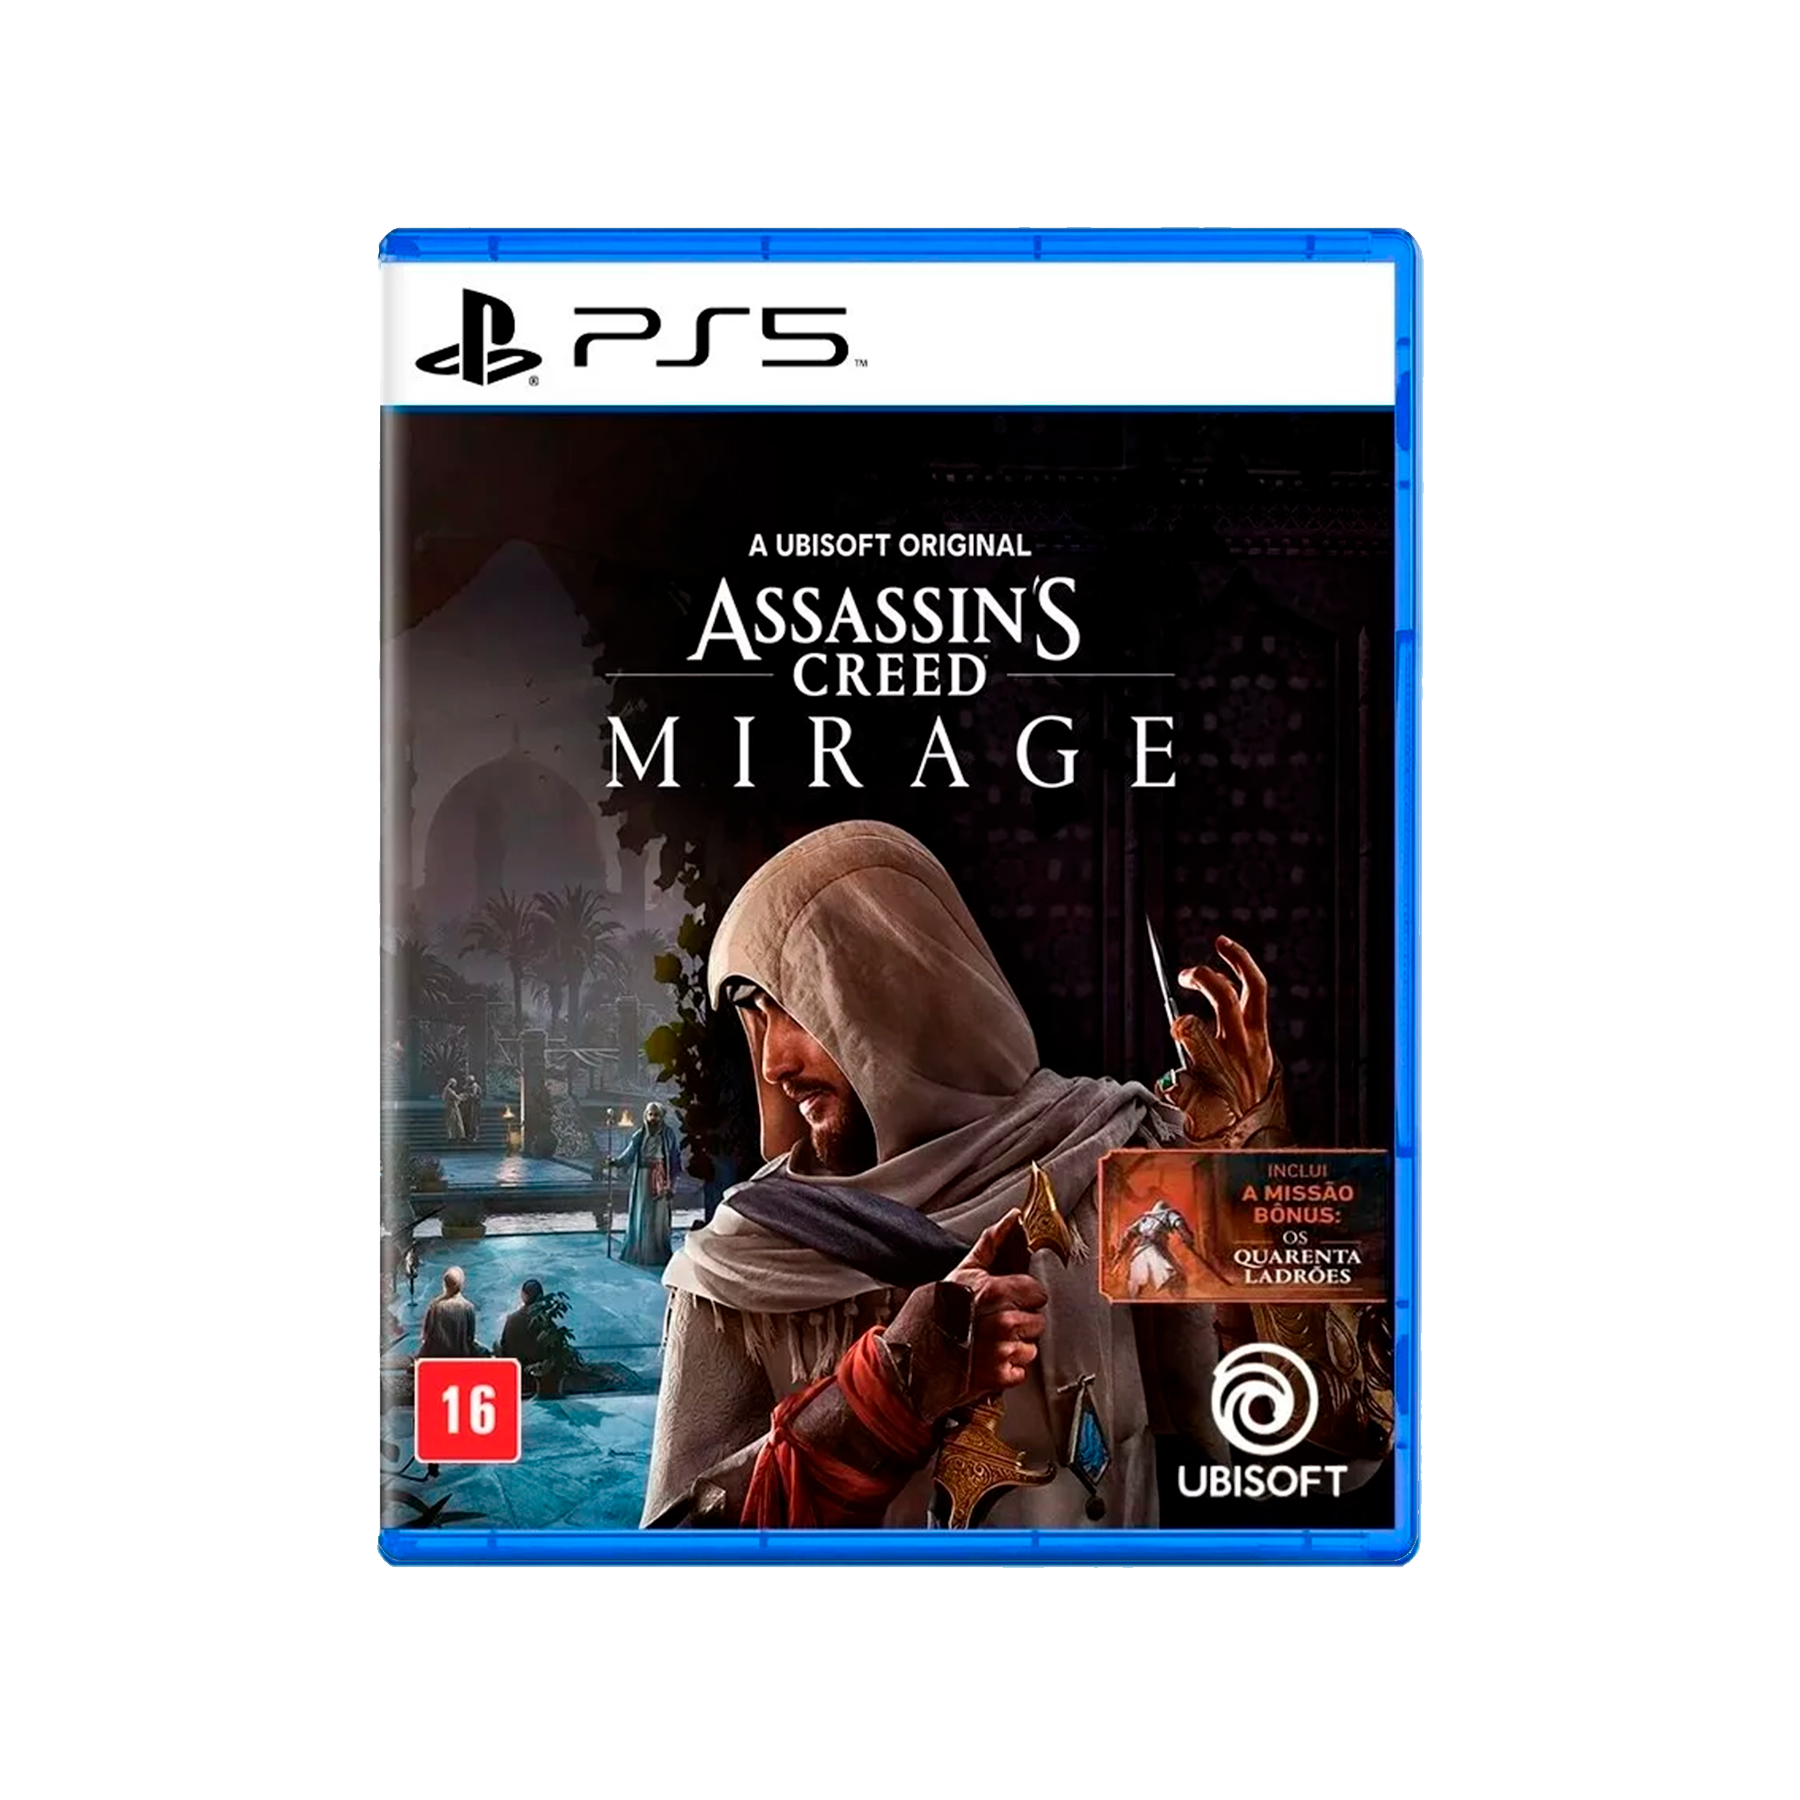 Assassin's Creed Mirage - PS4 & PS5 Games